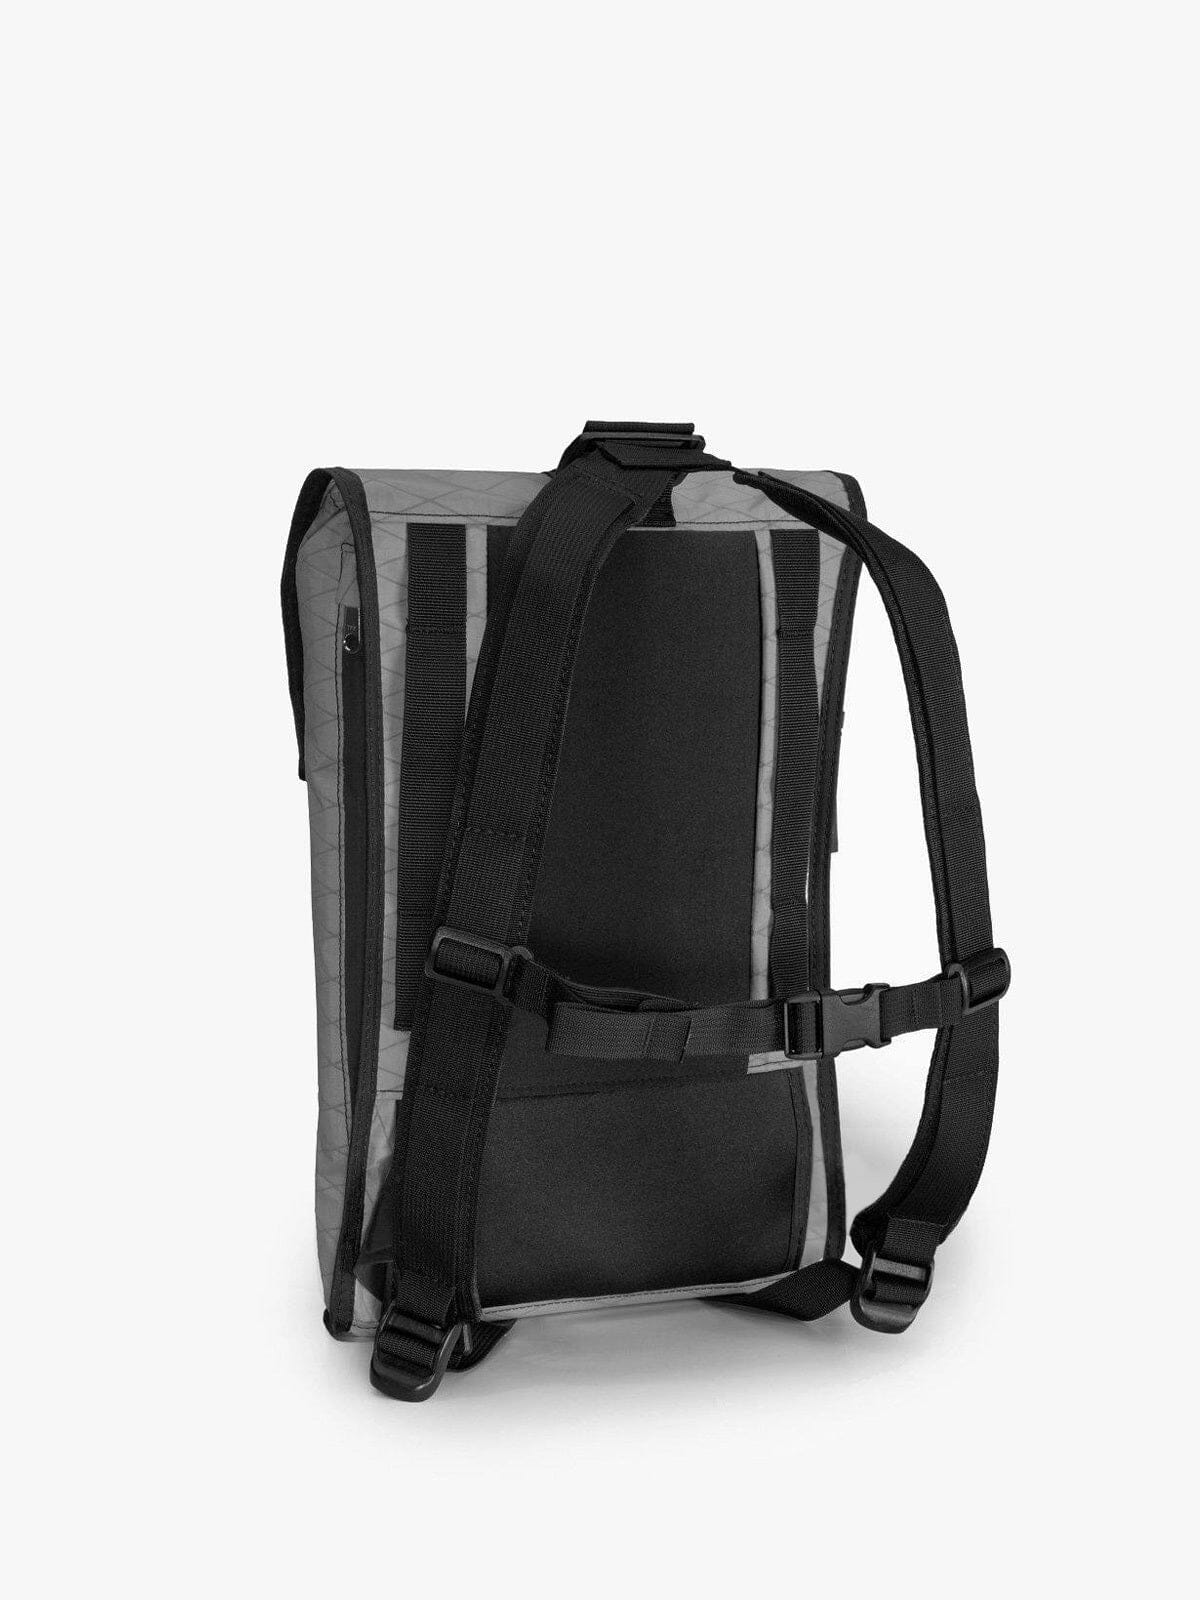 Removeable Backpack Harness : Spar by Mission Workshop - Weatherproof Bags & Technical Apparel - San Francisco & Los Angeles - Built to endure - Guaranteed forever